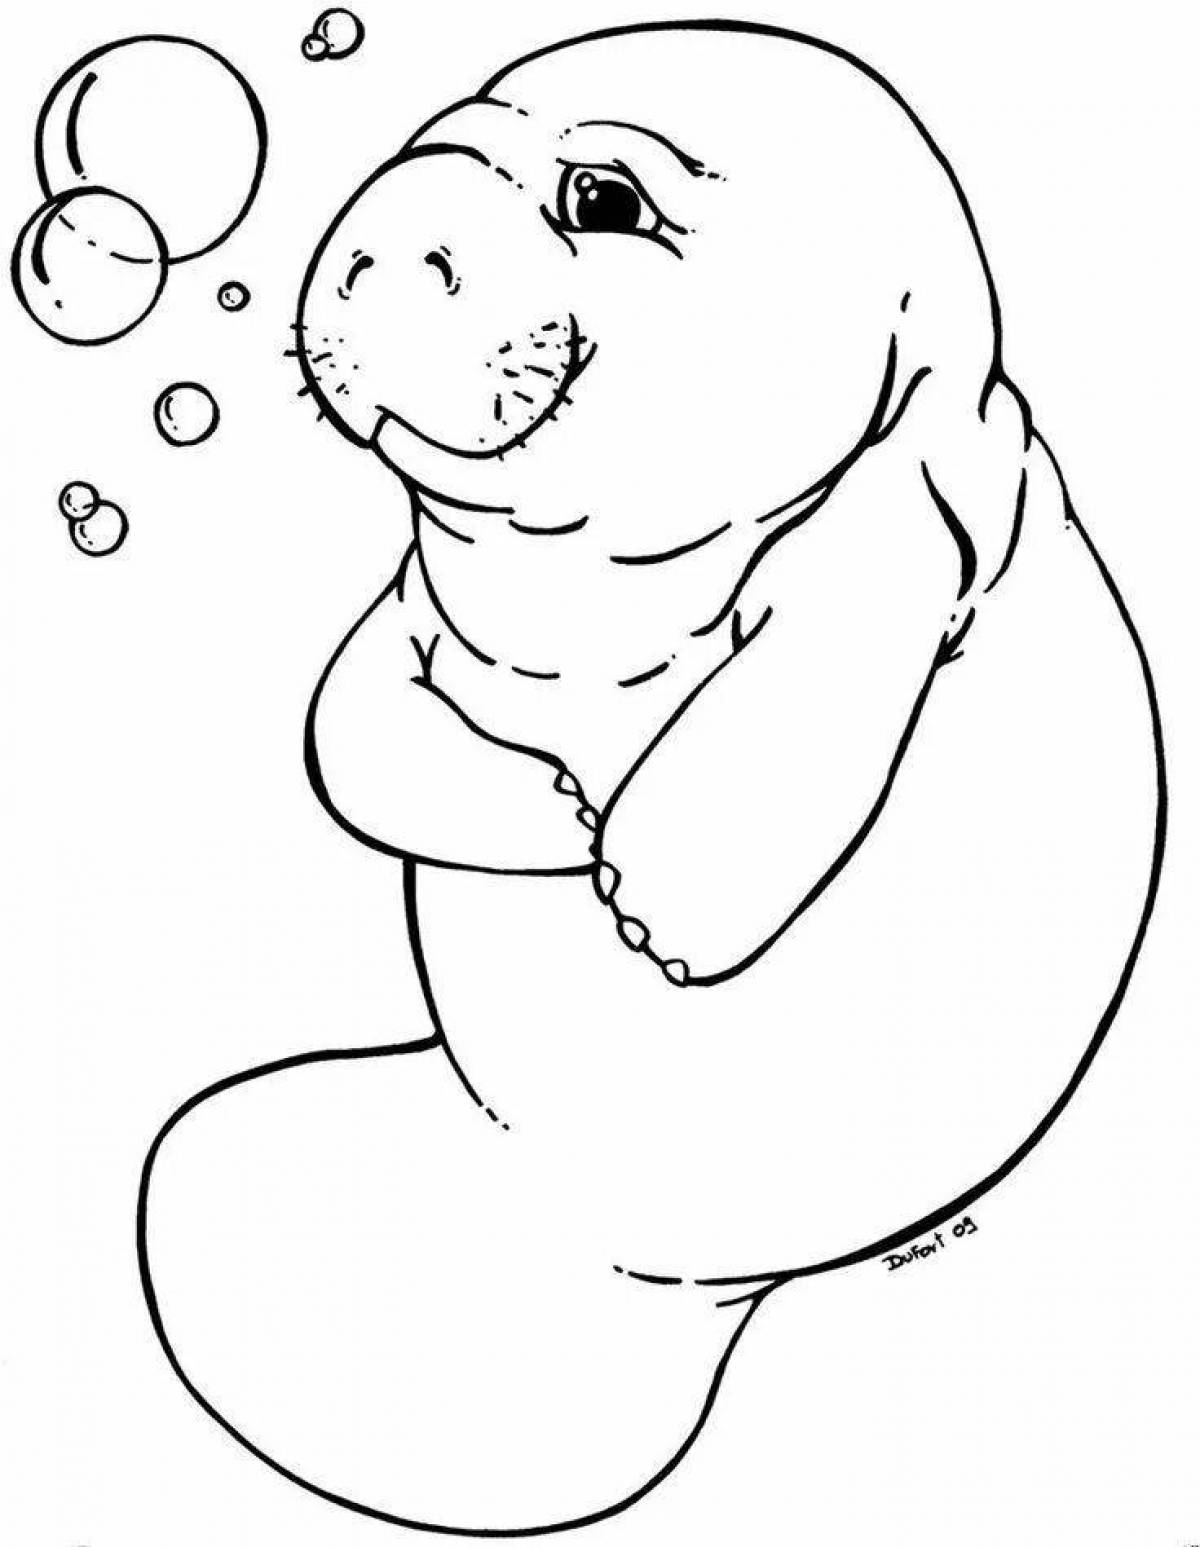 Exotic elephant seal coloring page